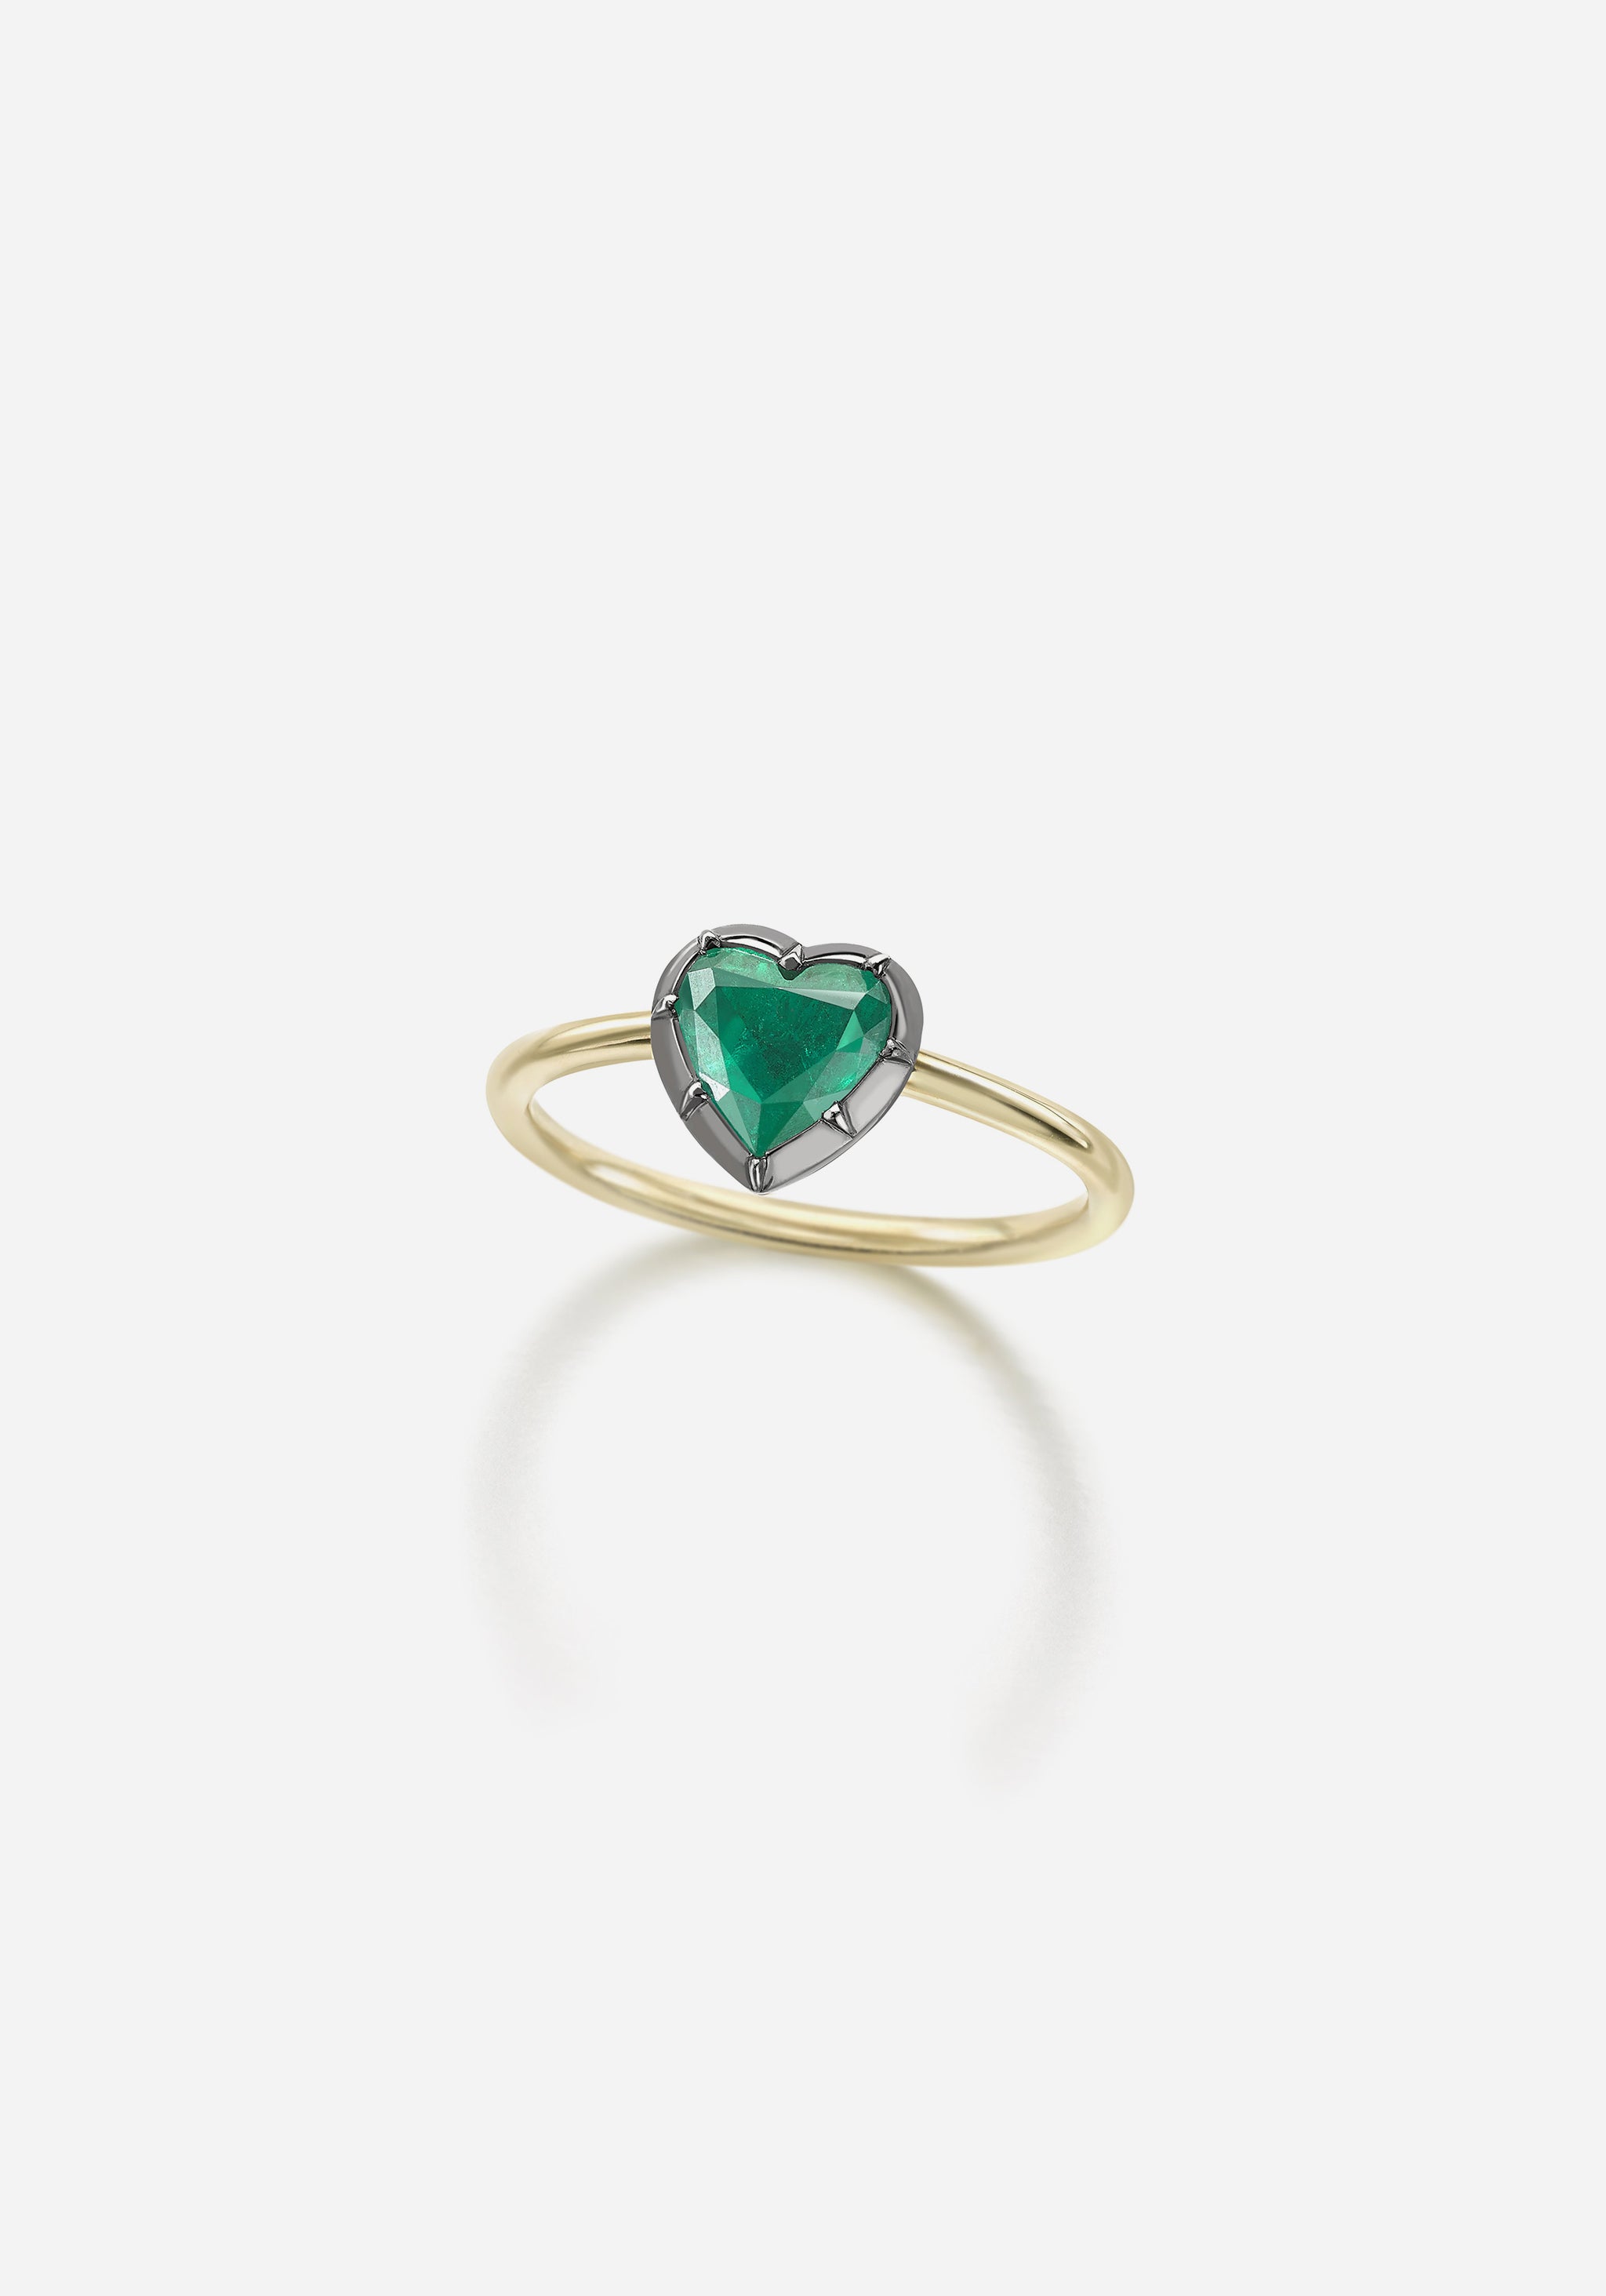 Button Back Emerald Ring - Heart Shaped 1.49ct